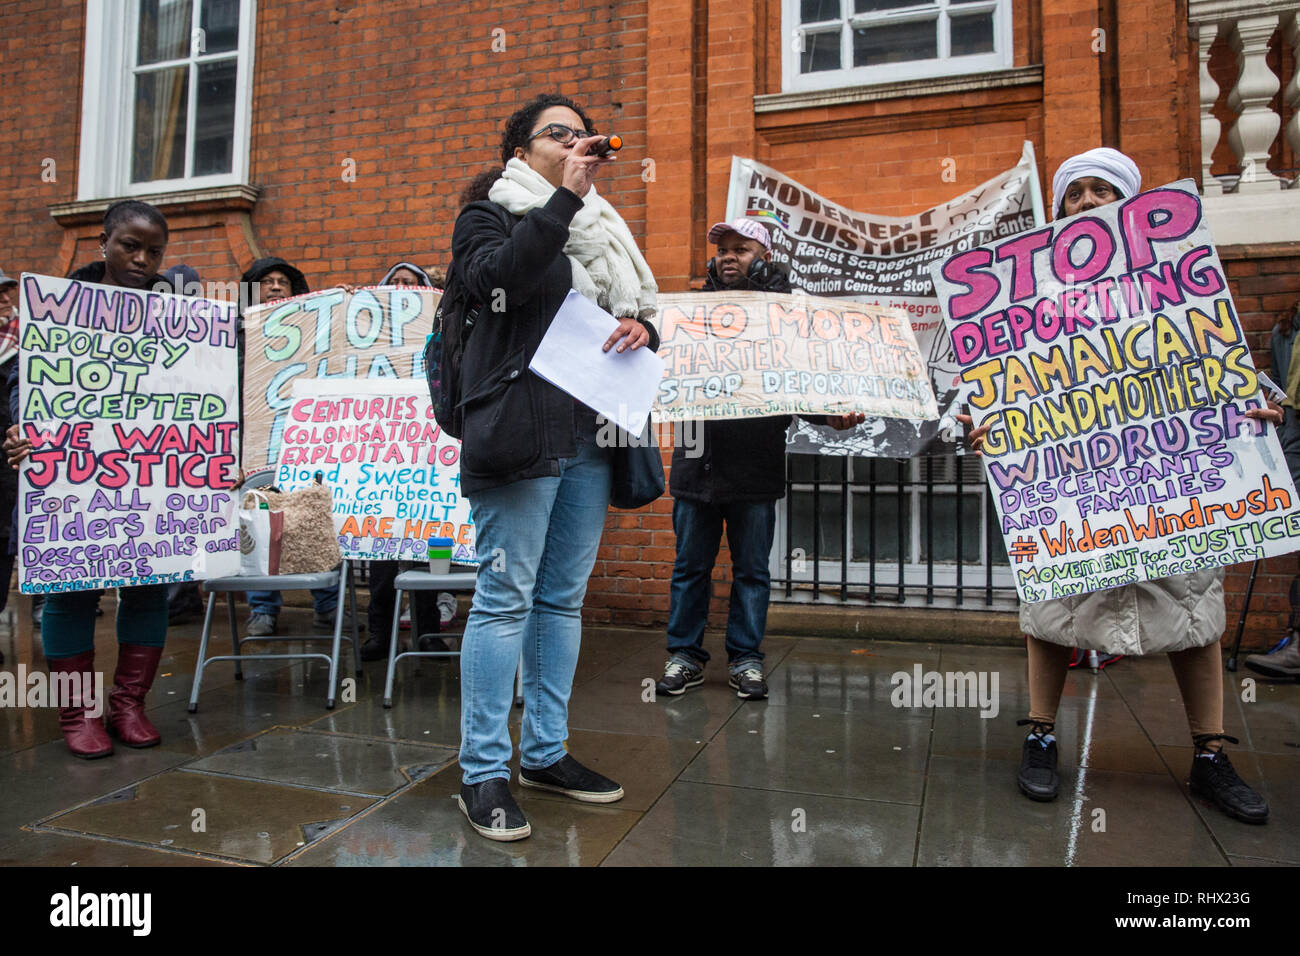 London, UK. 4th February, 2019. Antonia Bright of Movement for Justice addresses a protest outside the Jamaican High Commission against plans by the Home Office and Jamaican government to recommence mass deportation charter flights on 6th February. The enforced removals are reported to include people who came to the UK as children and parents with British children and the deportation flight would be the first since March 2017 and the Windrush scandal. Credit: Mark Kerrison/Alamy Live News Stock Photo